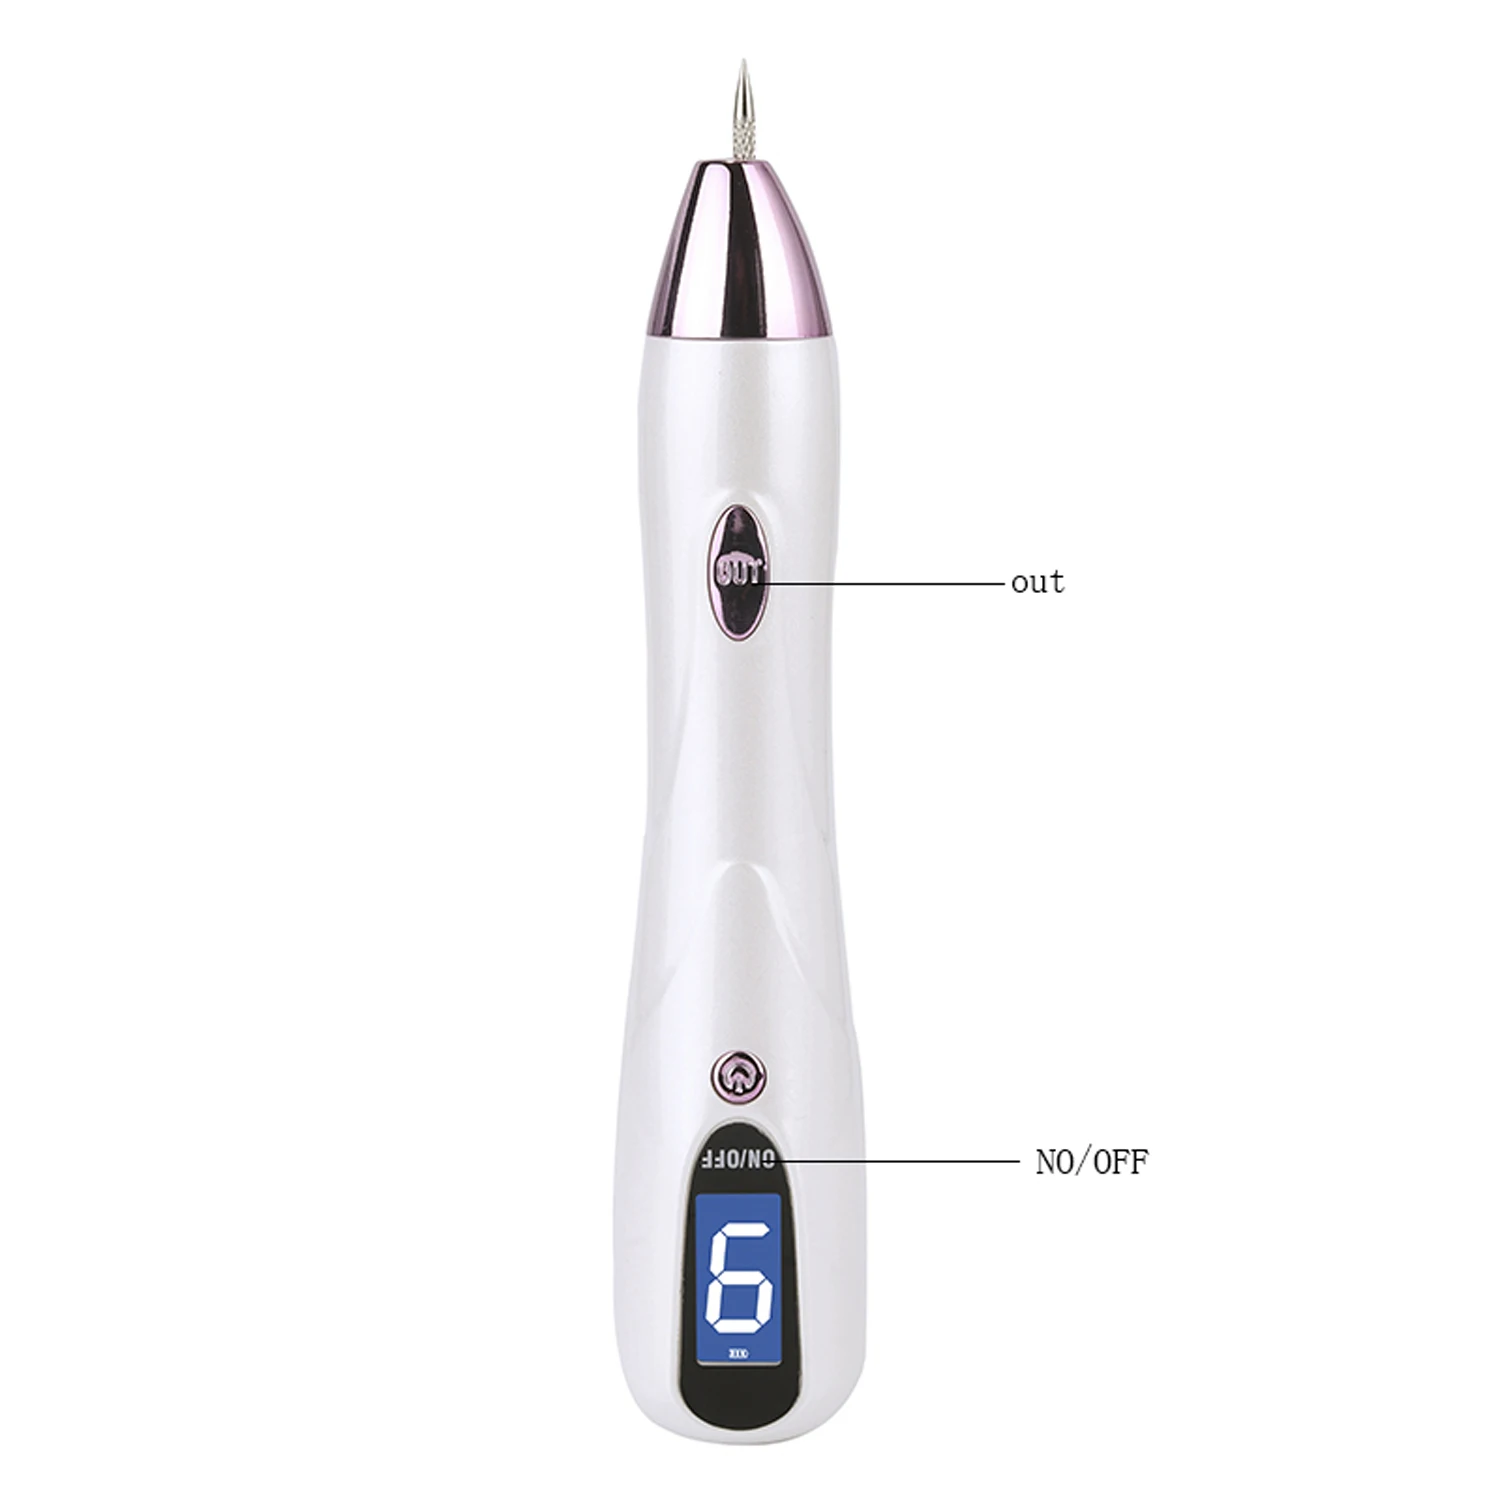 

Wart Removal Machine Portable Face Beauty Tool Facial Laser Plasma Pen Device Freckle Tattoo Mole Pen Skin Tag Dark Spot Removal, Gold and pink